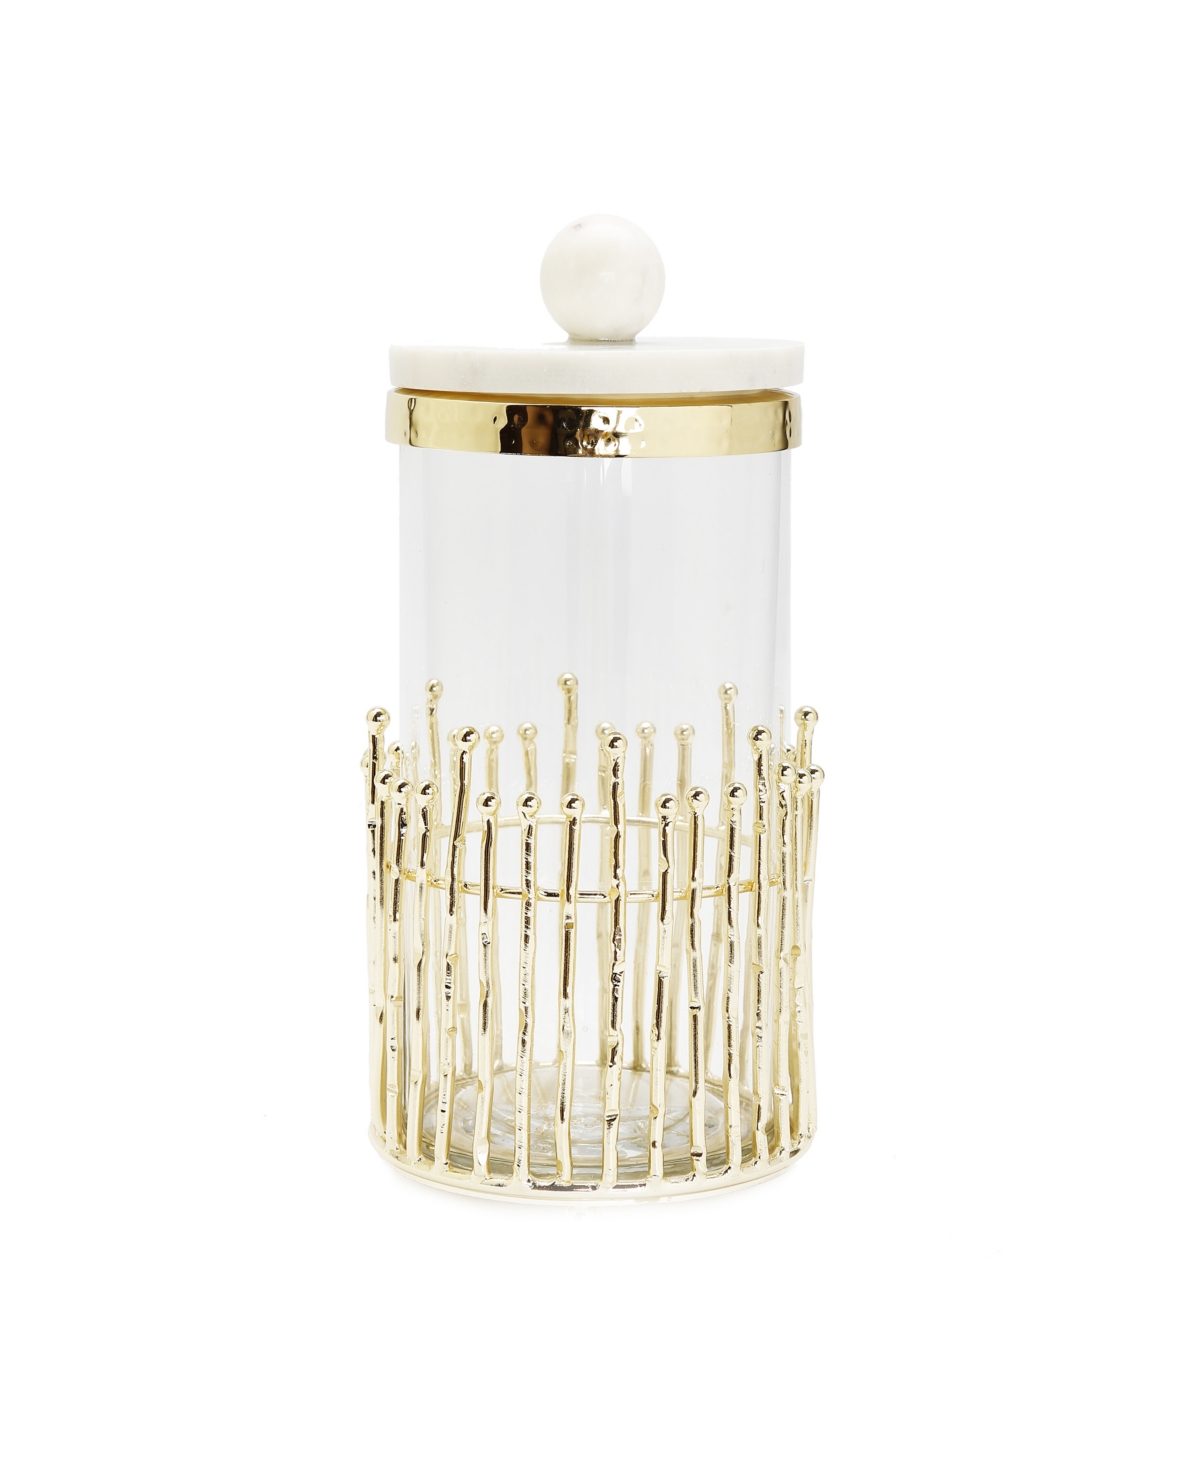 Medium Canister with Straight Cut Design and Marble Lid Set, 2 Piece - Gold-Tone